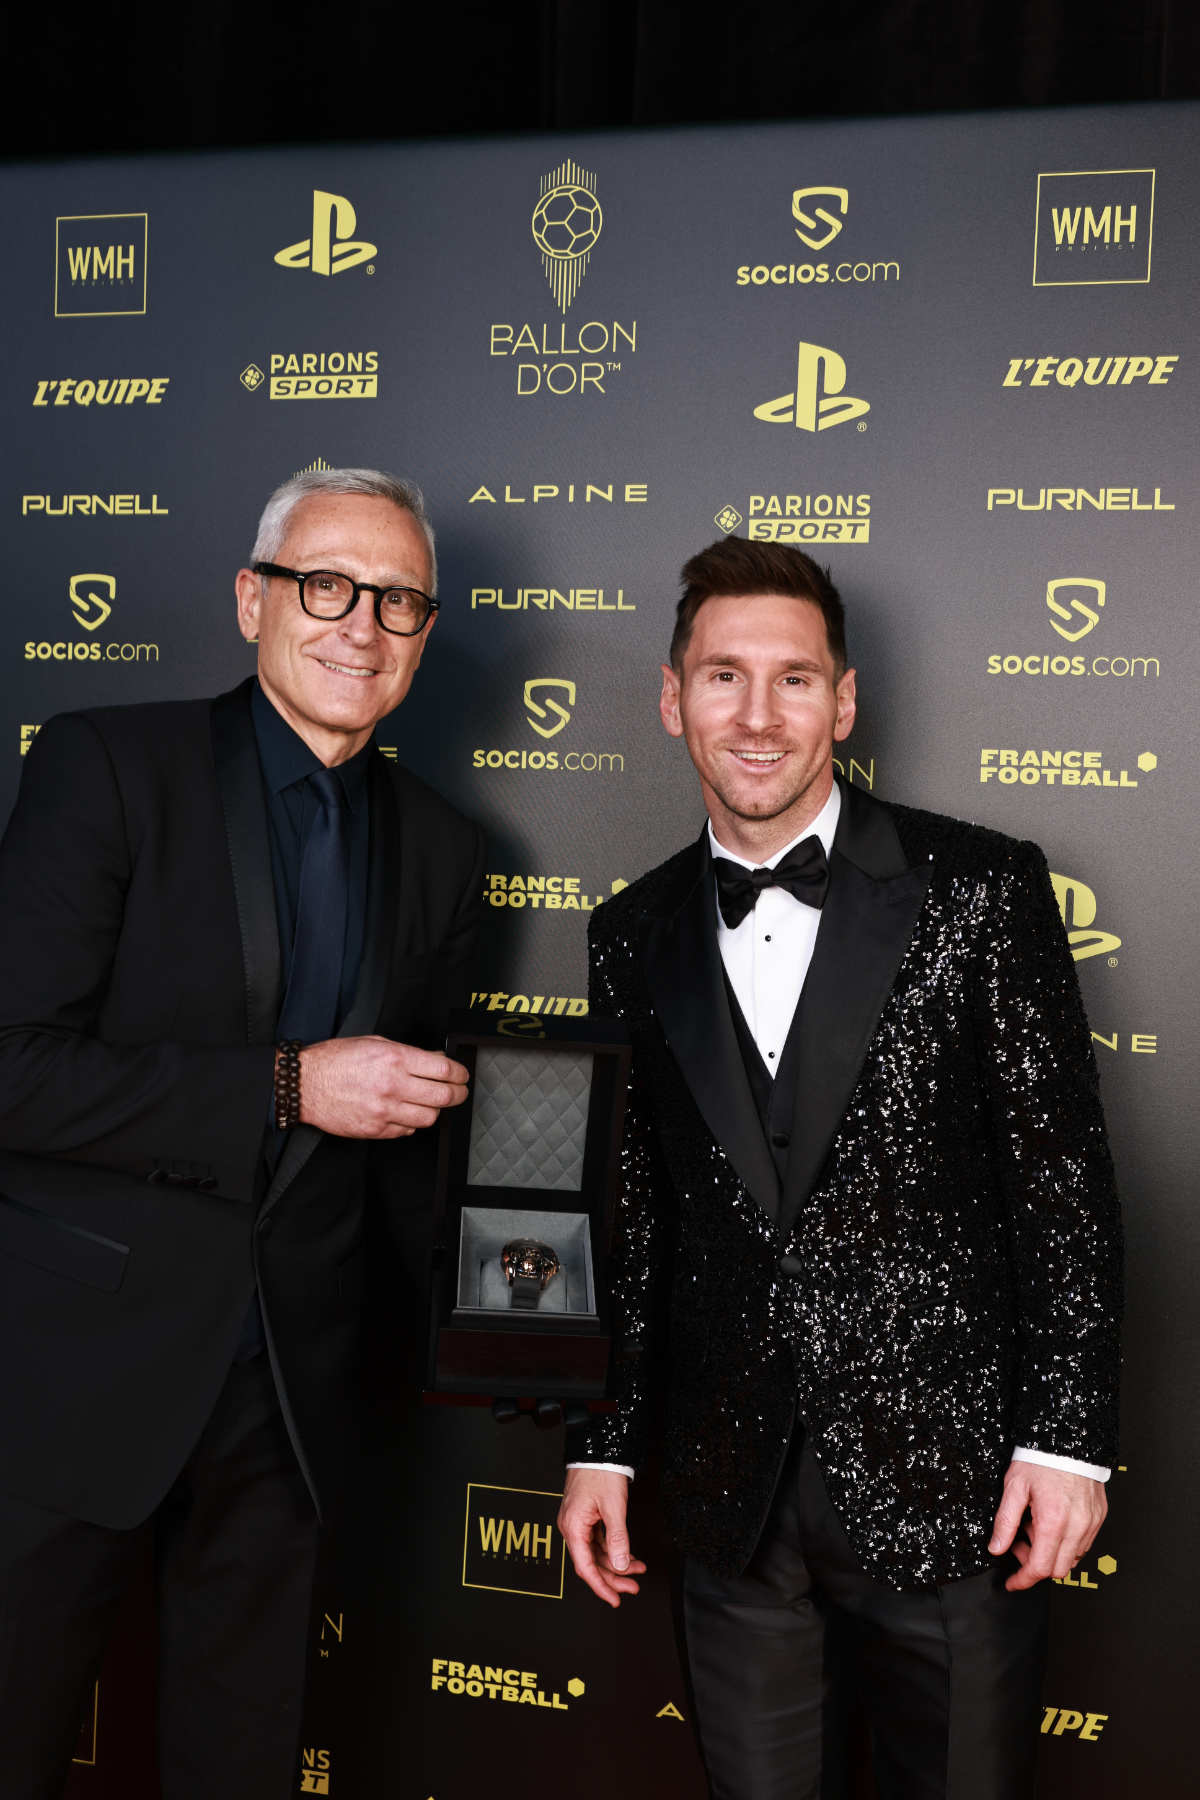 Purnell Honored To Be Official Partner Of The Ballon D'Or 2021 Ceremony